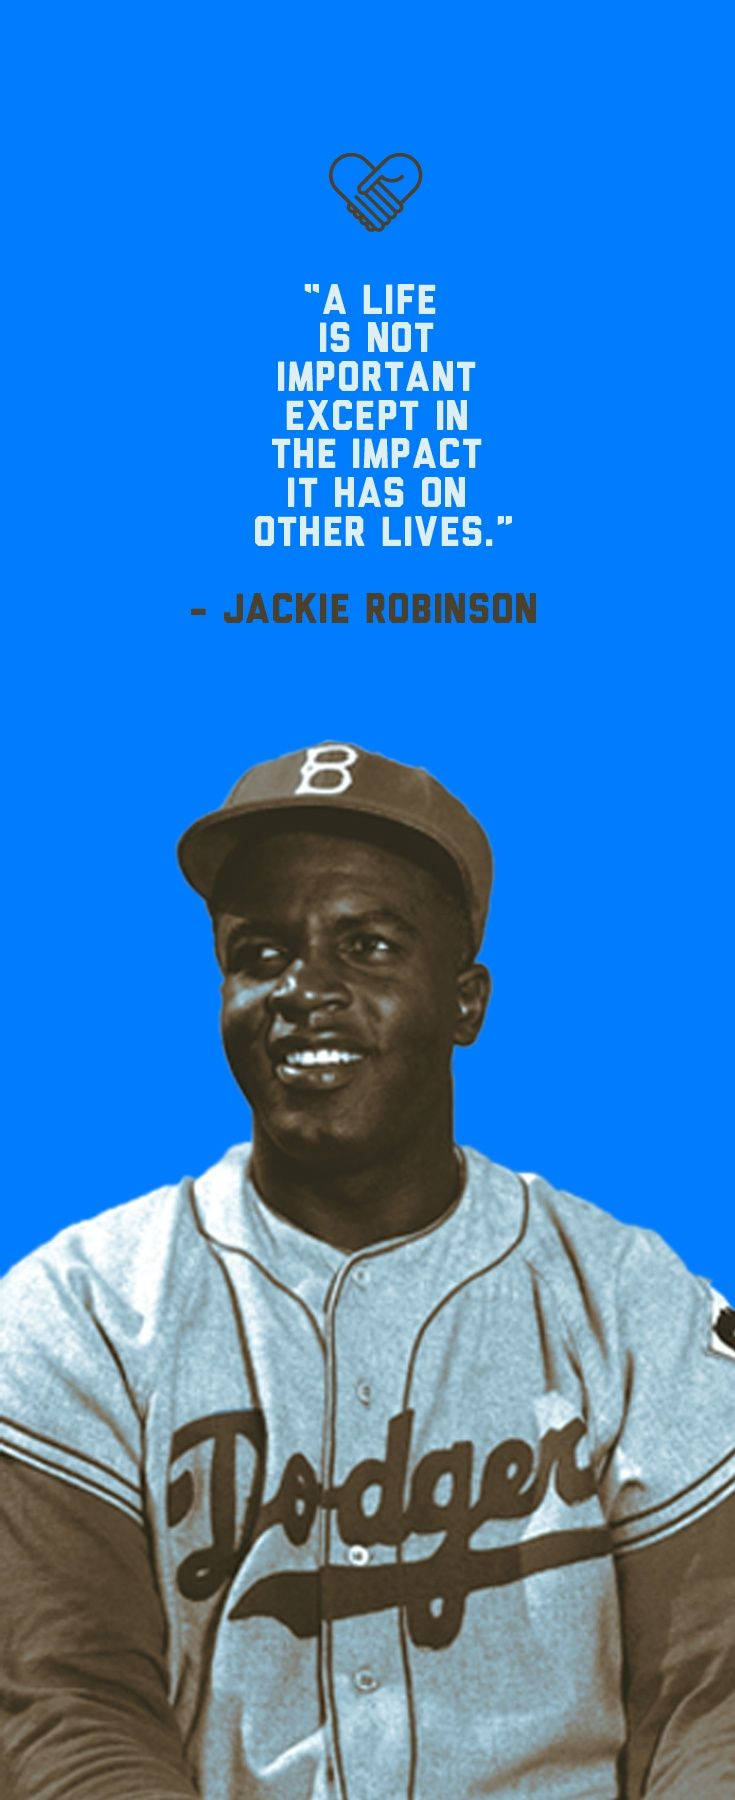 Jackie Robinson Quote About Life Background